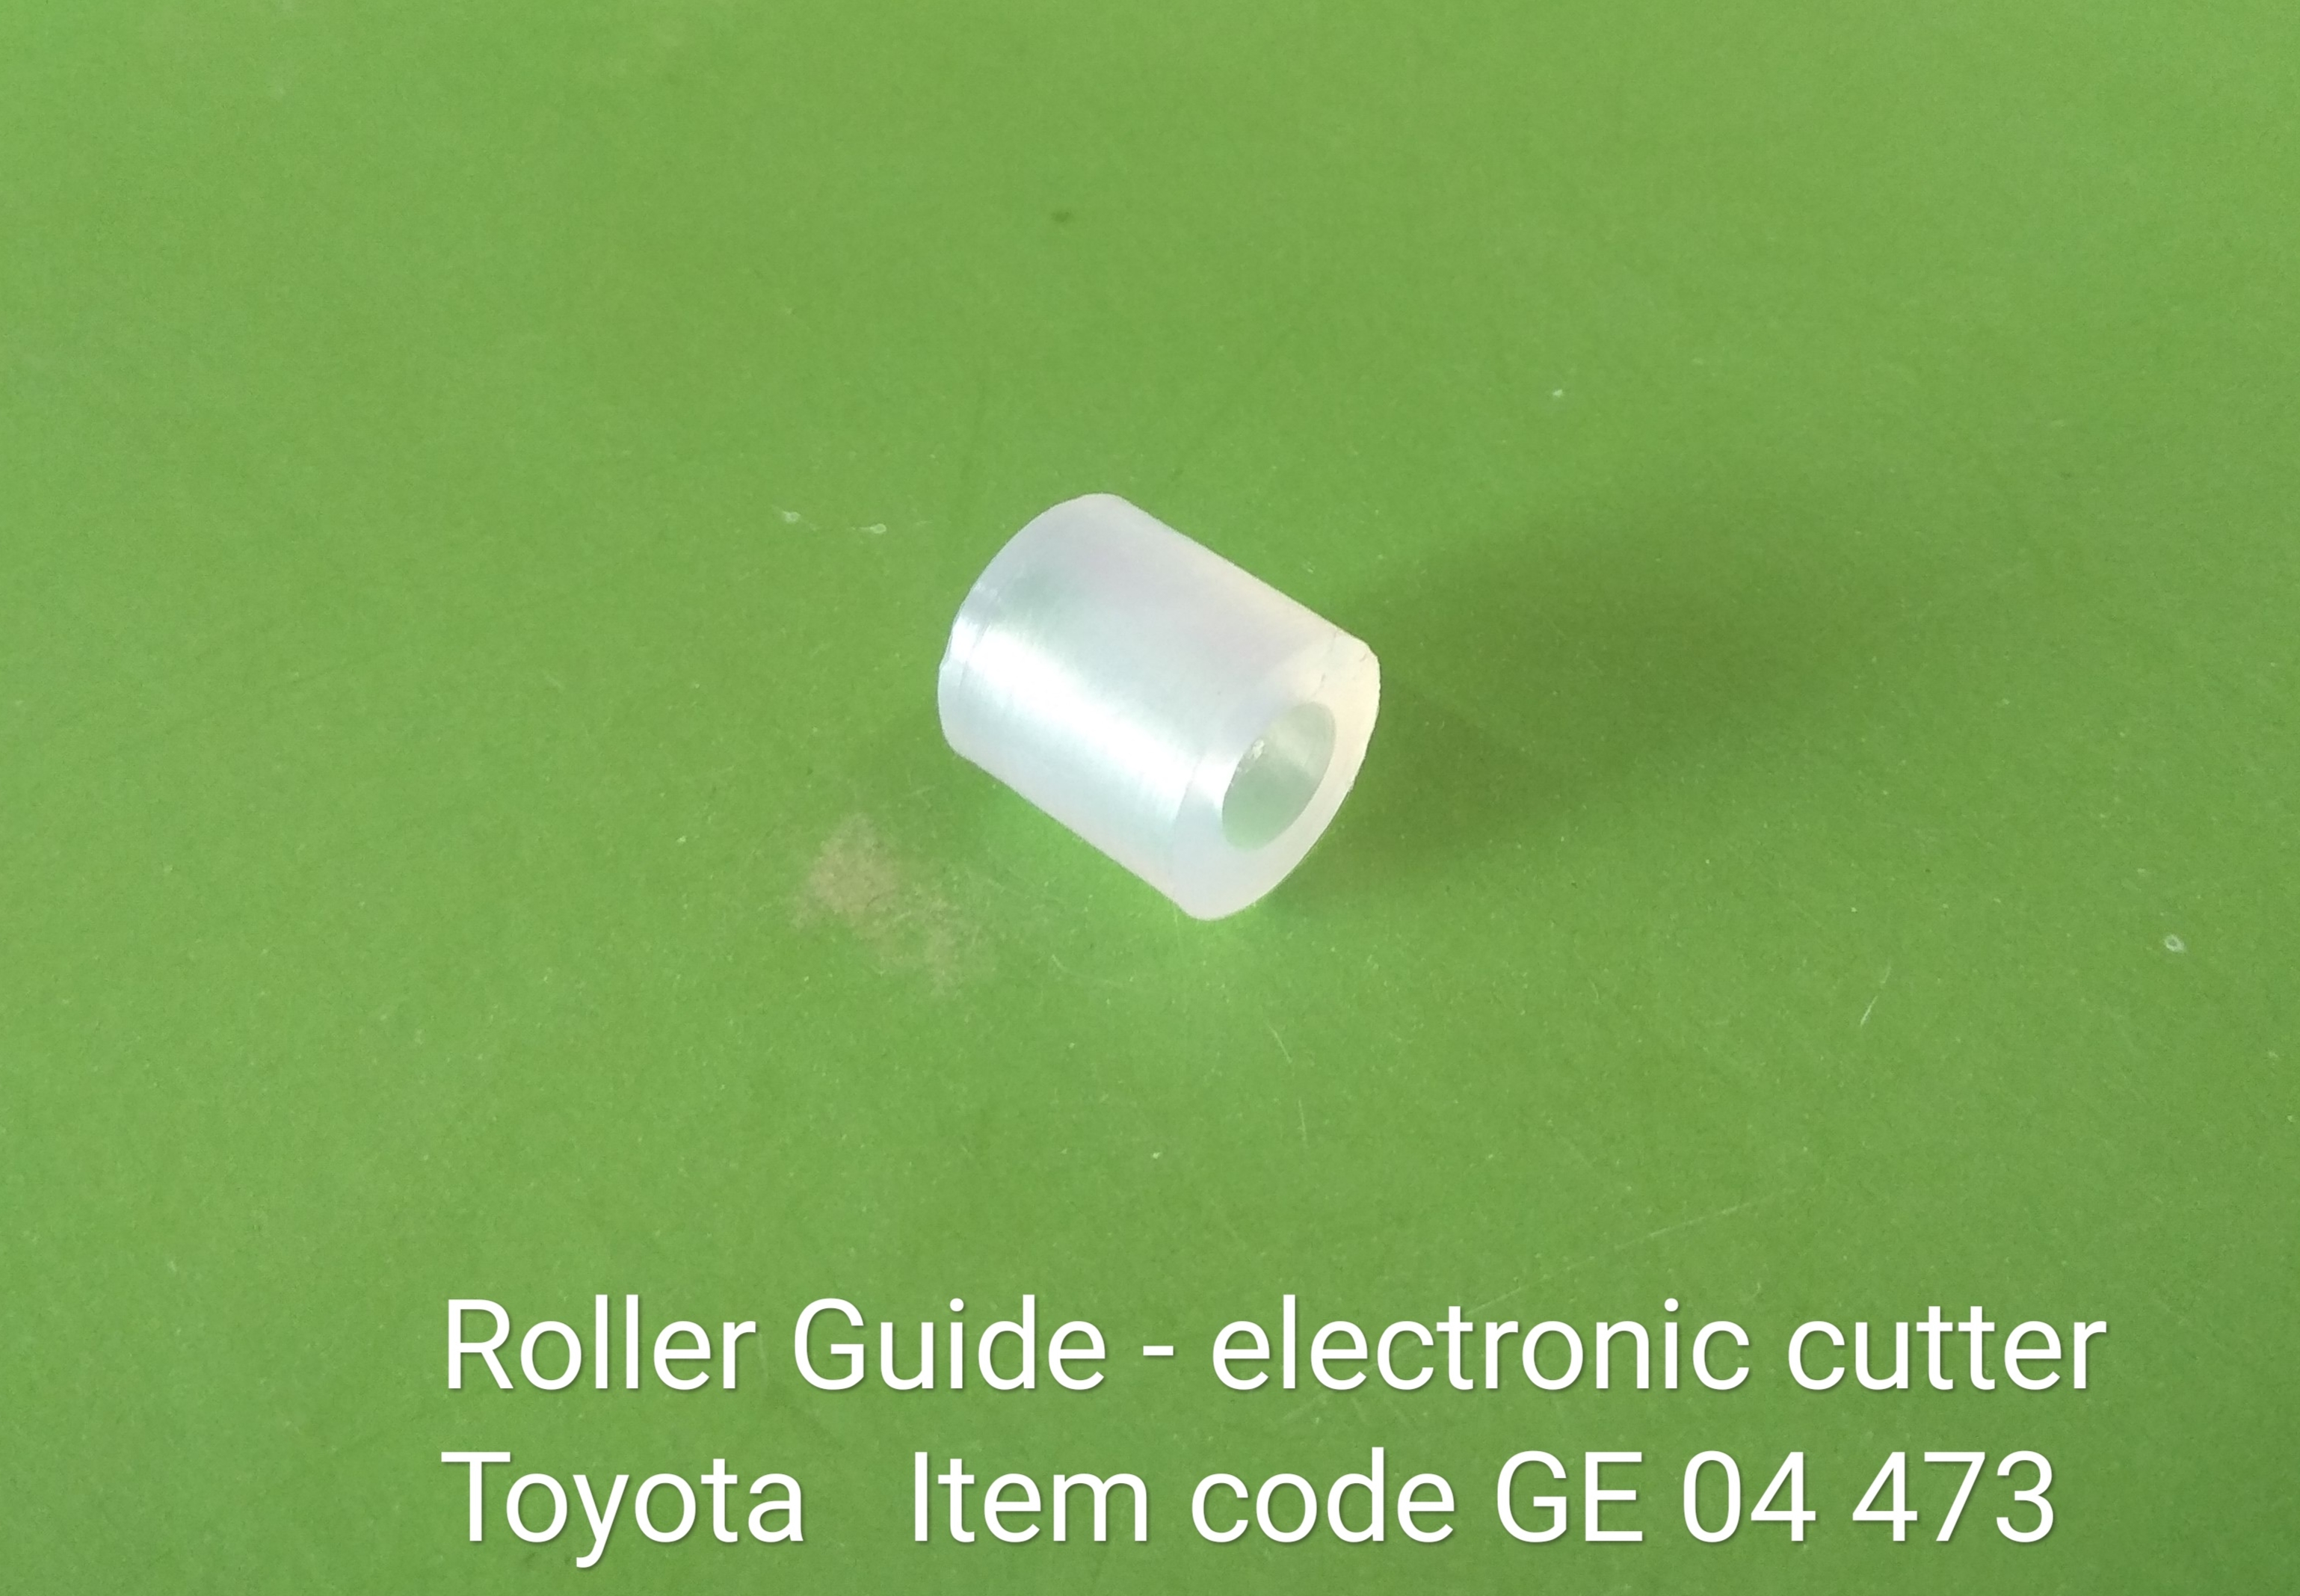 GE_04_473_ROLLER_GUIDE_-_ELECTRONIC_CUTTER_TOYOTA_53_18.jpg